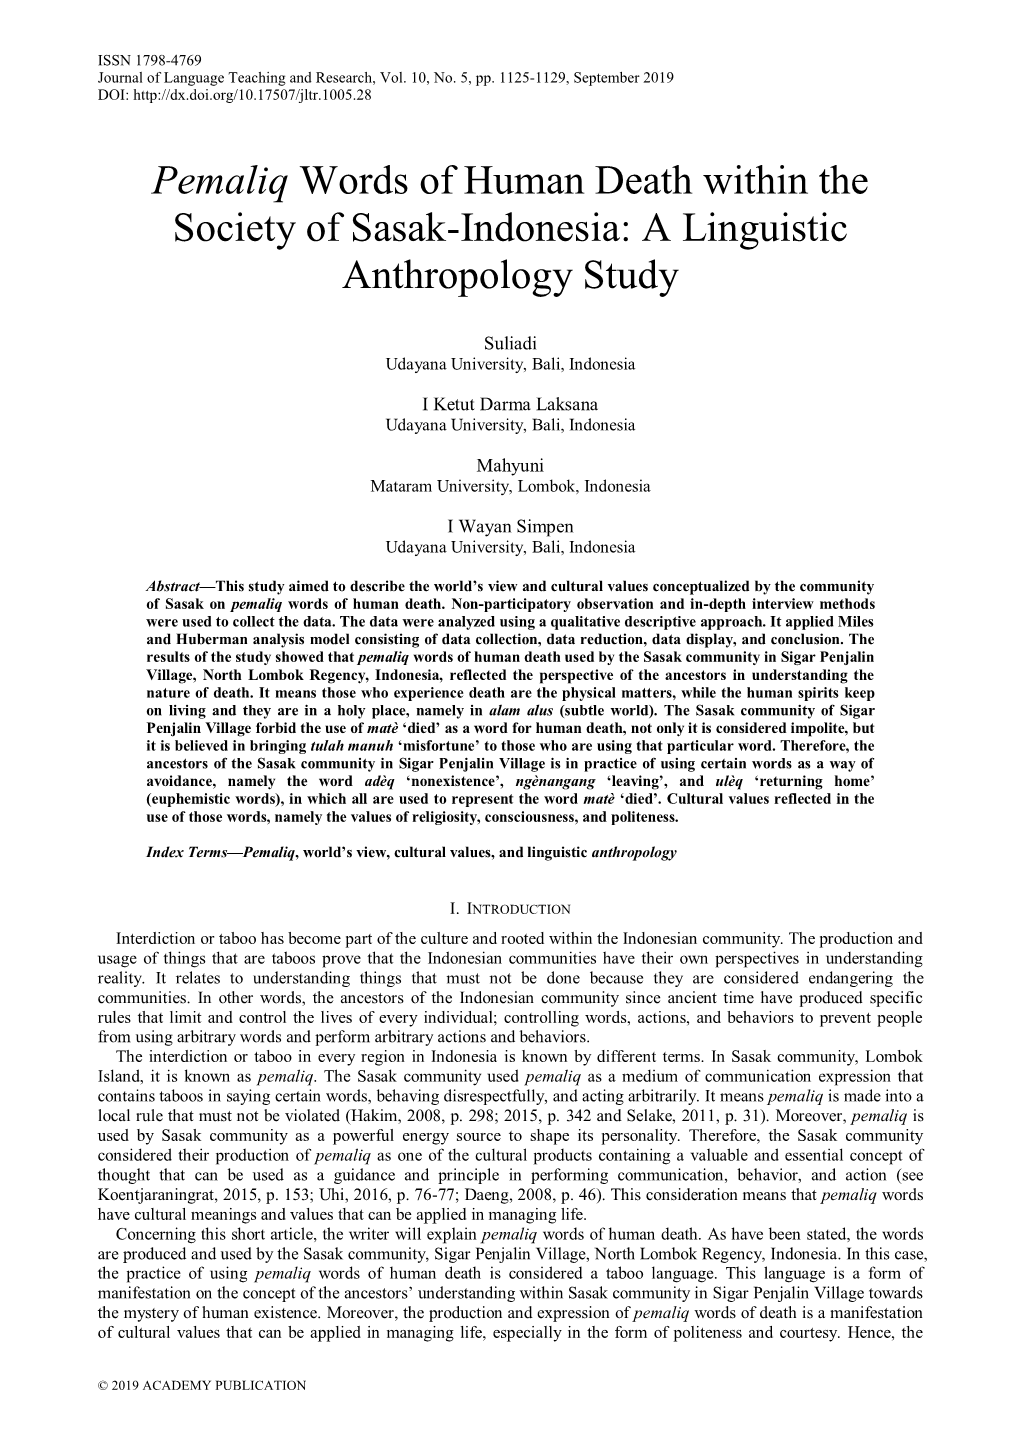 Pemaliq Words of Human Death Within the Society of Sasak-Indonesia: a Linguistic Anthropology Study